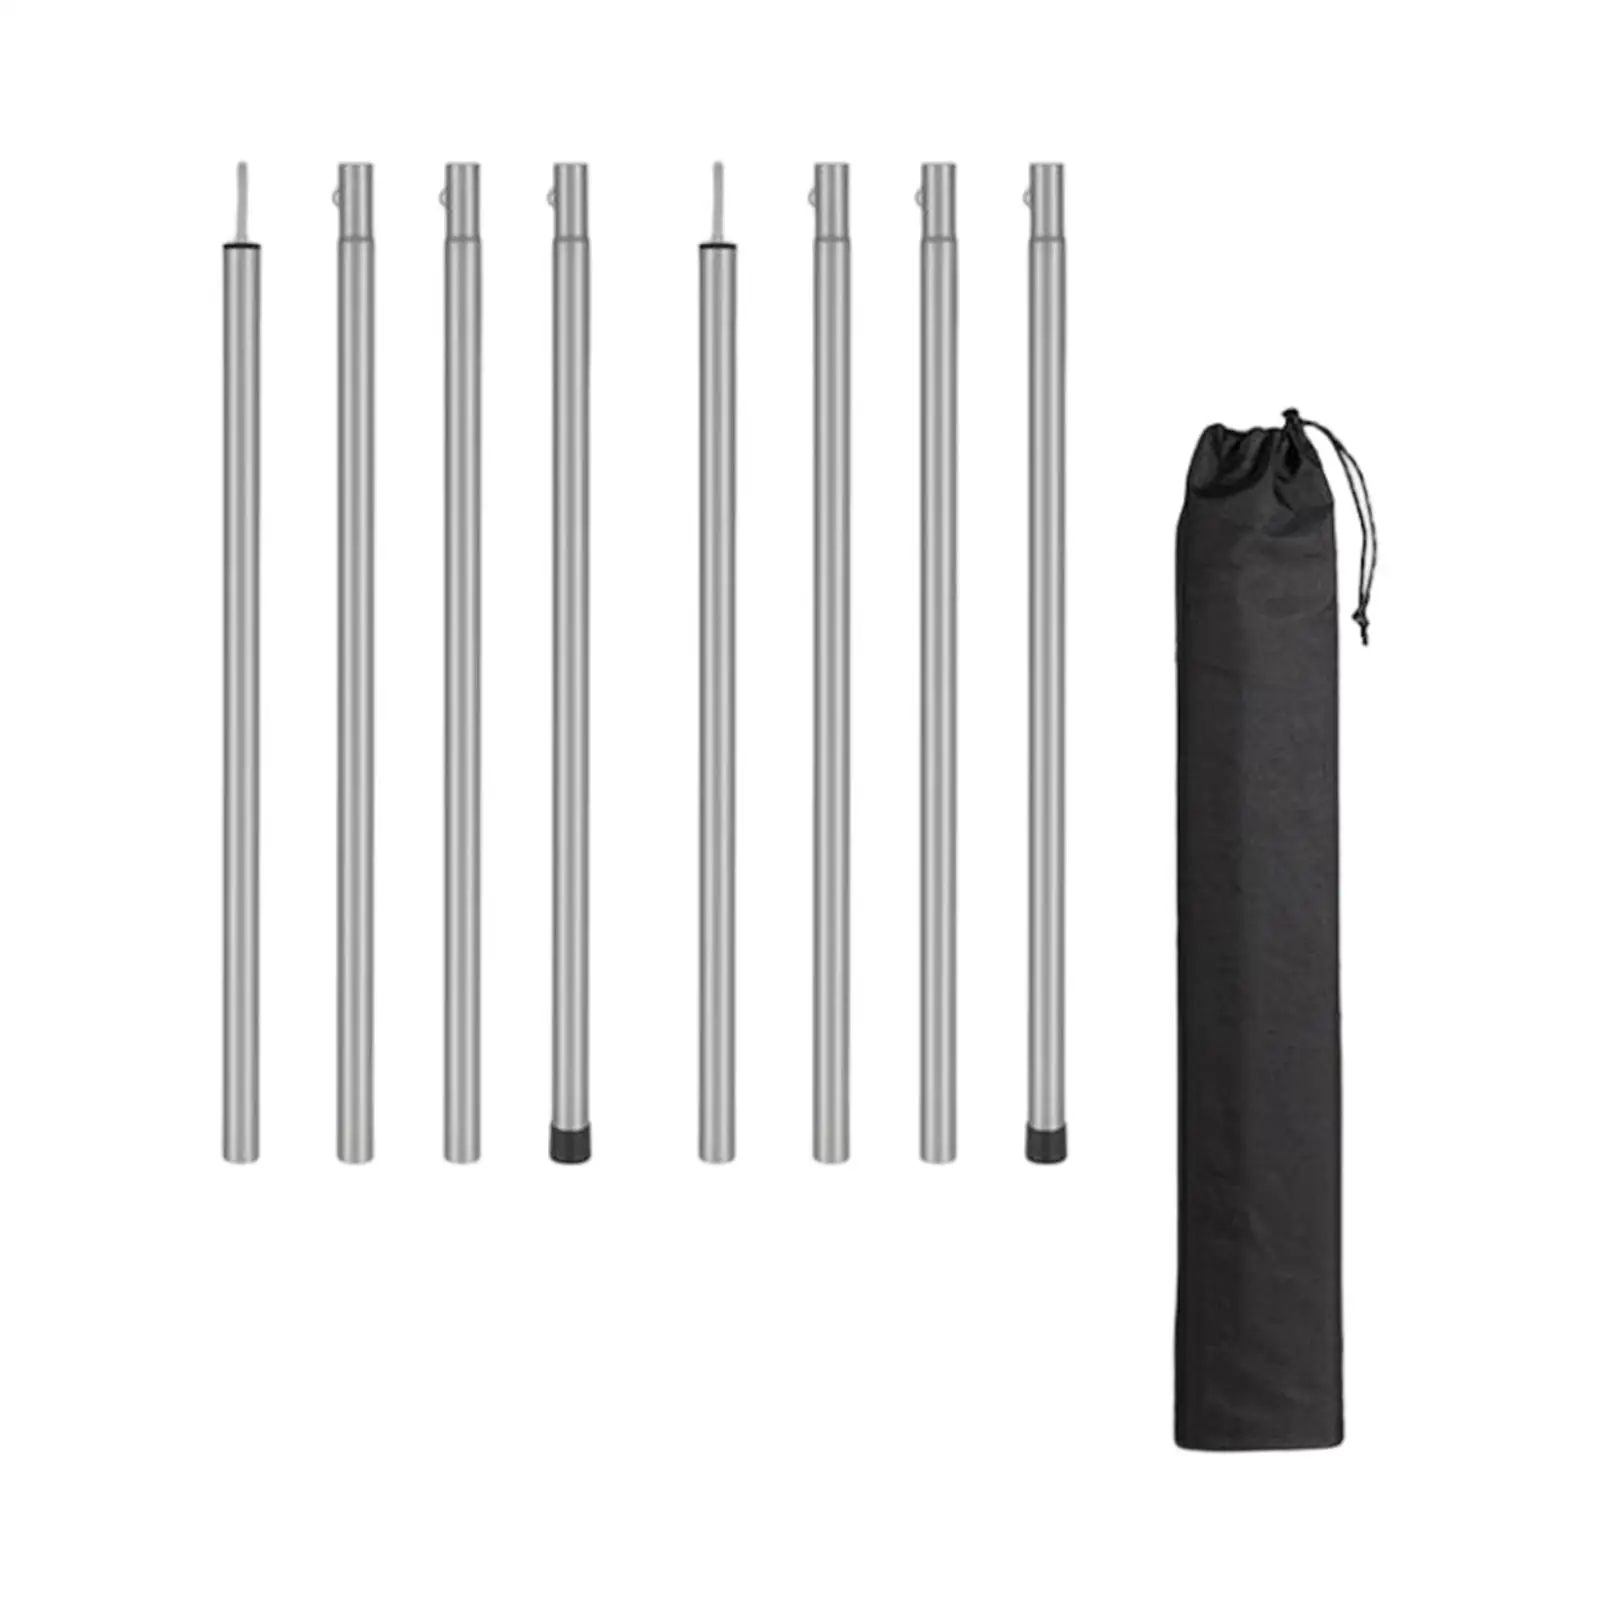 Tent Poles Canopy Pole Detachable Awning Support with Storage Bag Replacement Tarp Poles for Camping Tent Tarp Home Backyard